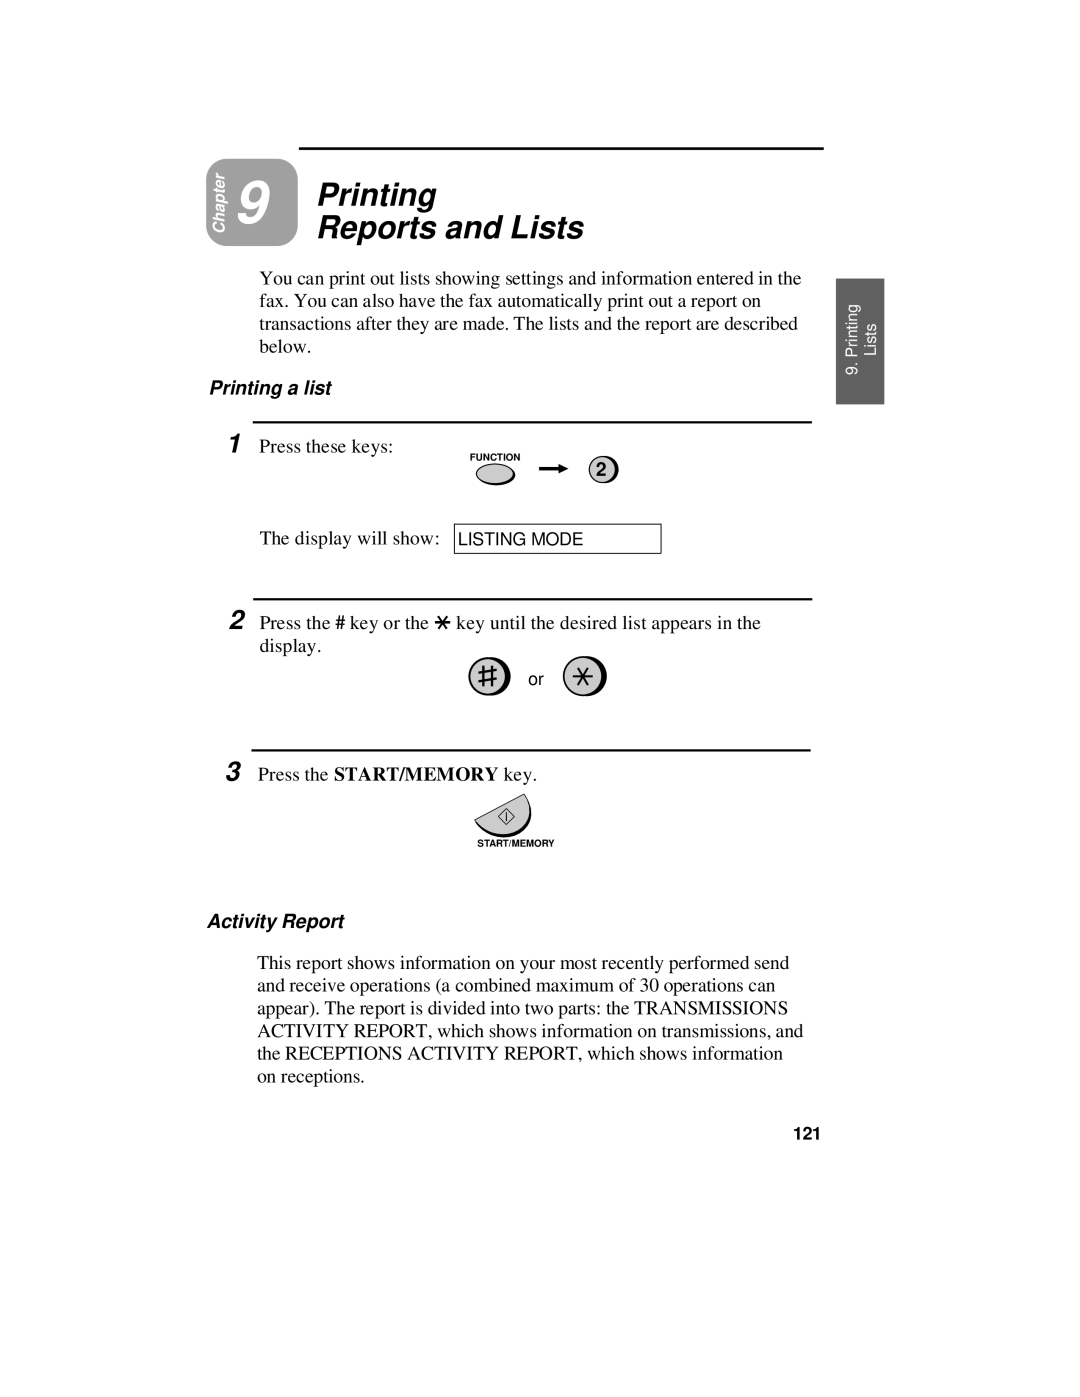 Sharp UX-470 operation manual Reports and Lists, Printing a list, Activity Report, 121 